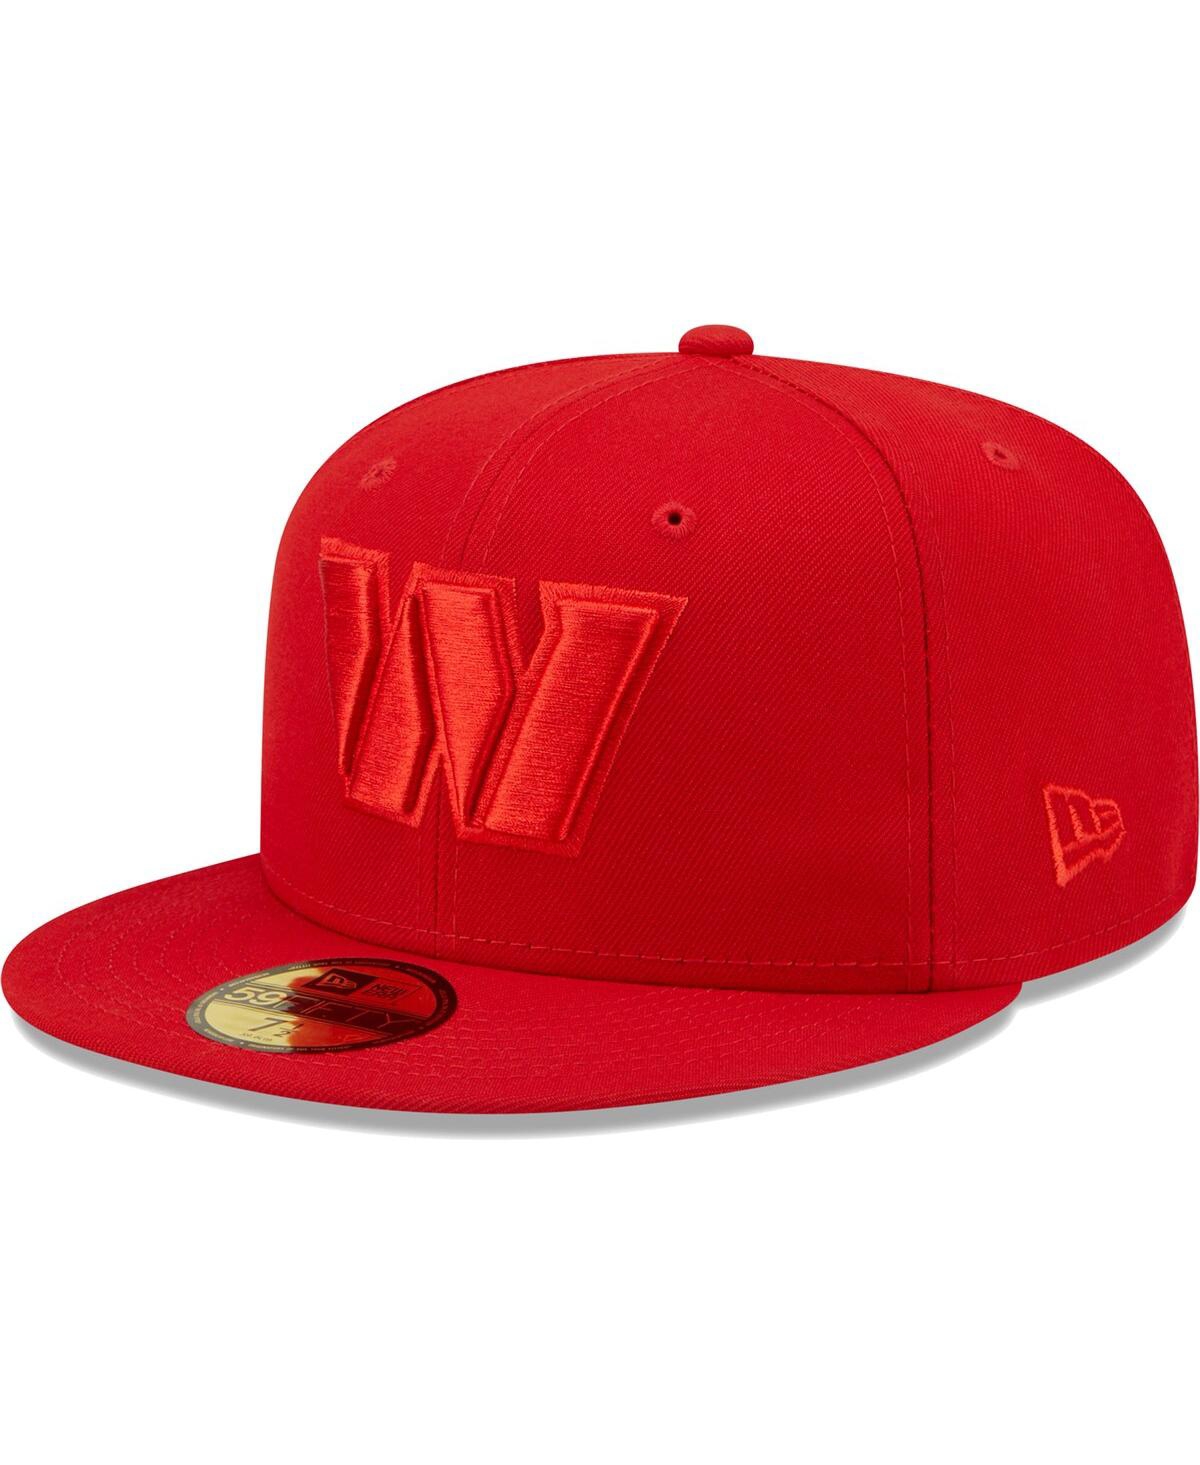 NEW ERA MEN'S NEW ERA SCARLET WASHINGTON COMMANDERS COLOR PACK 59FIFTY FITTED HAT